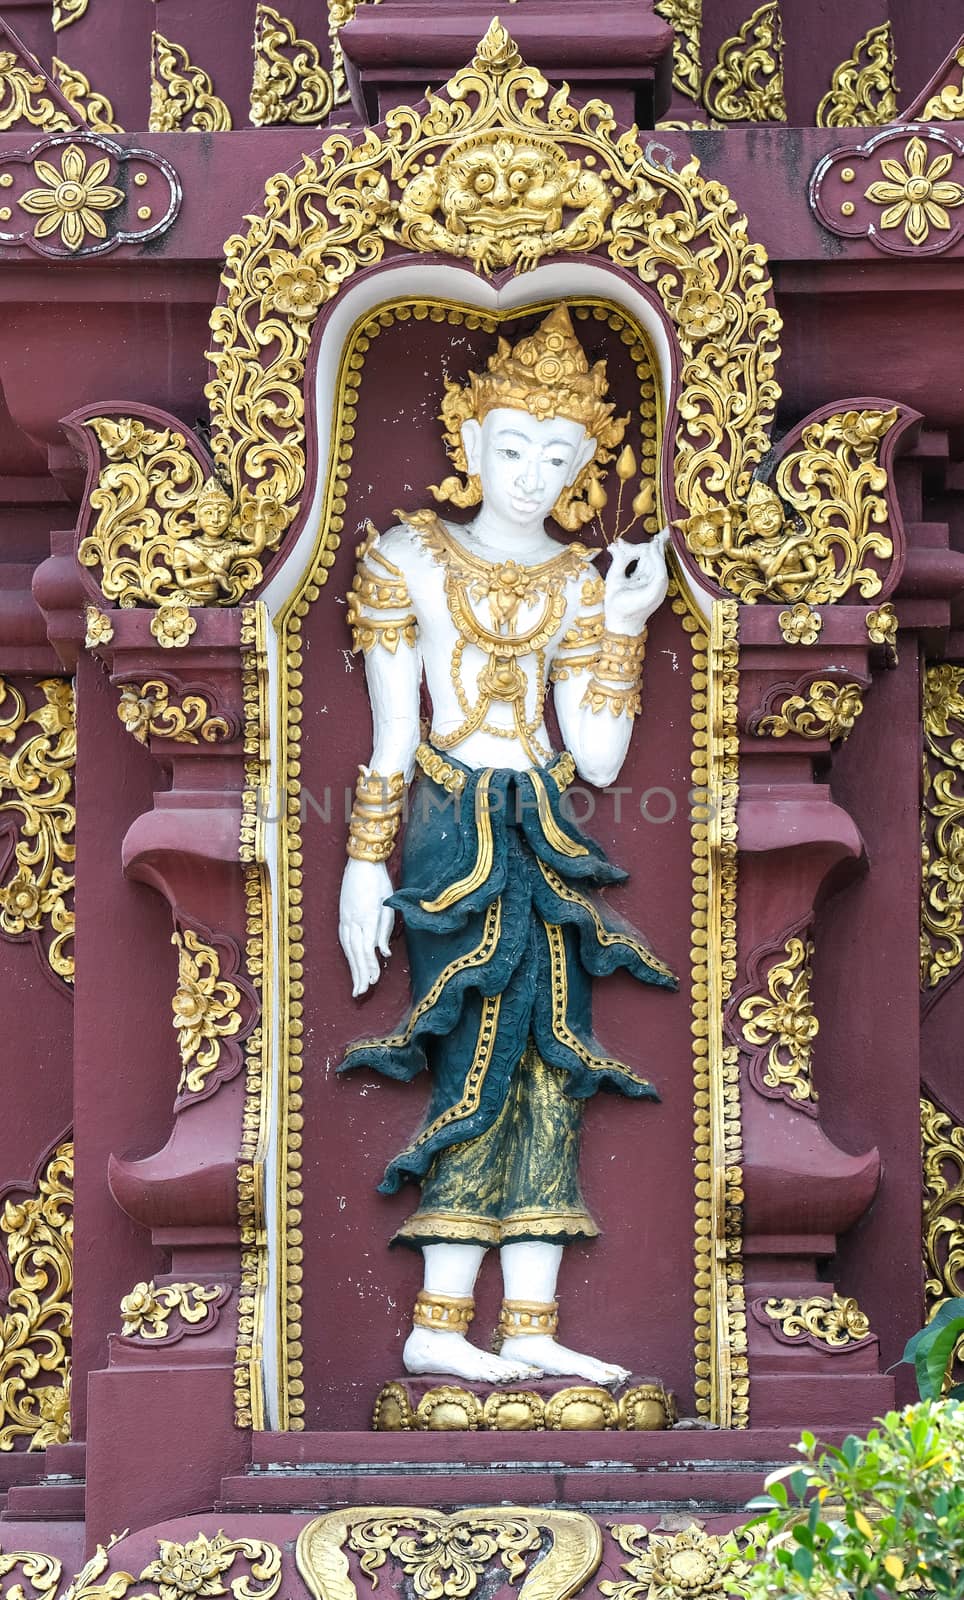 Thai stucco art with an angle dressed in garment painted with green and gold.